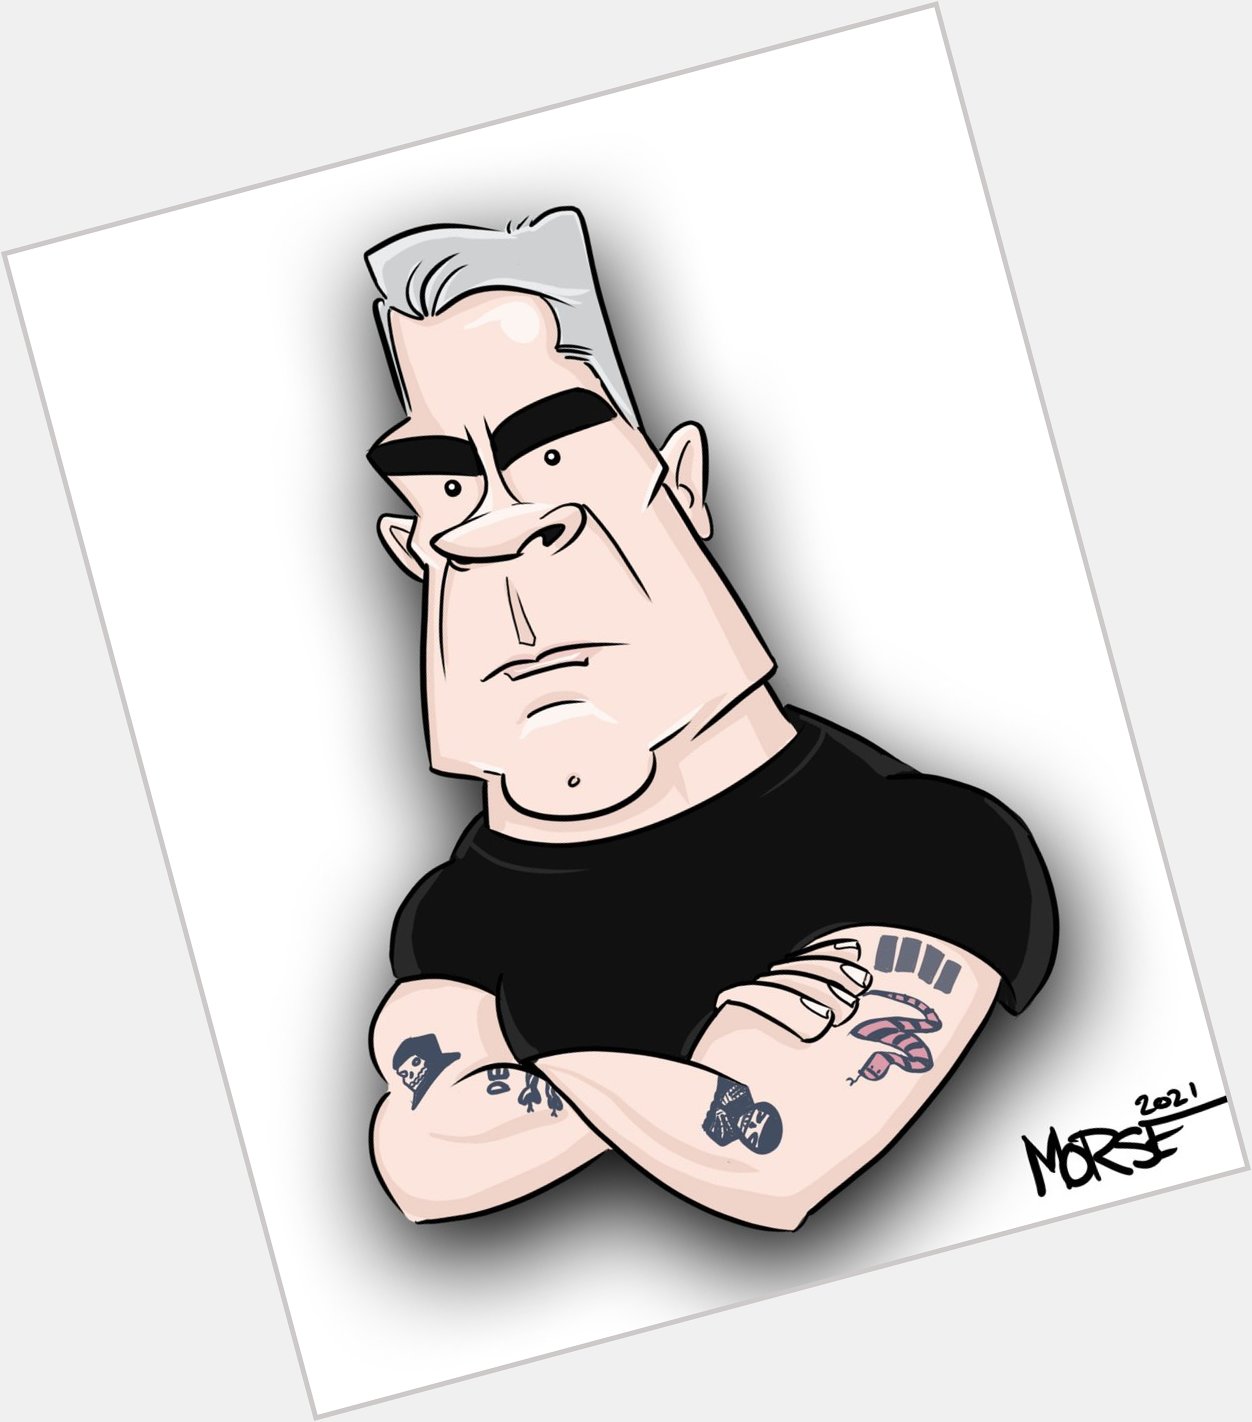 Happy 60th Birthday to Henry Rollins!  Want a caricature for your very own?  Raise your Black Flag and message me! 